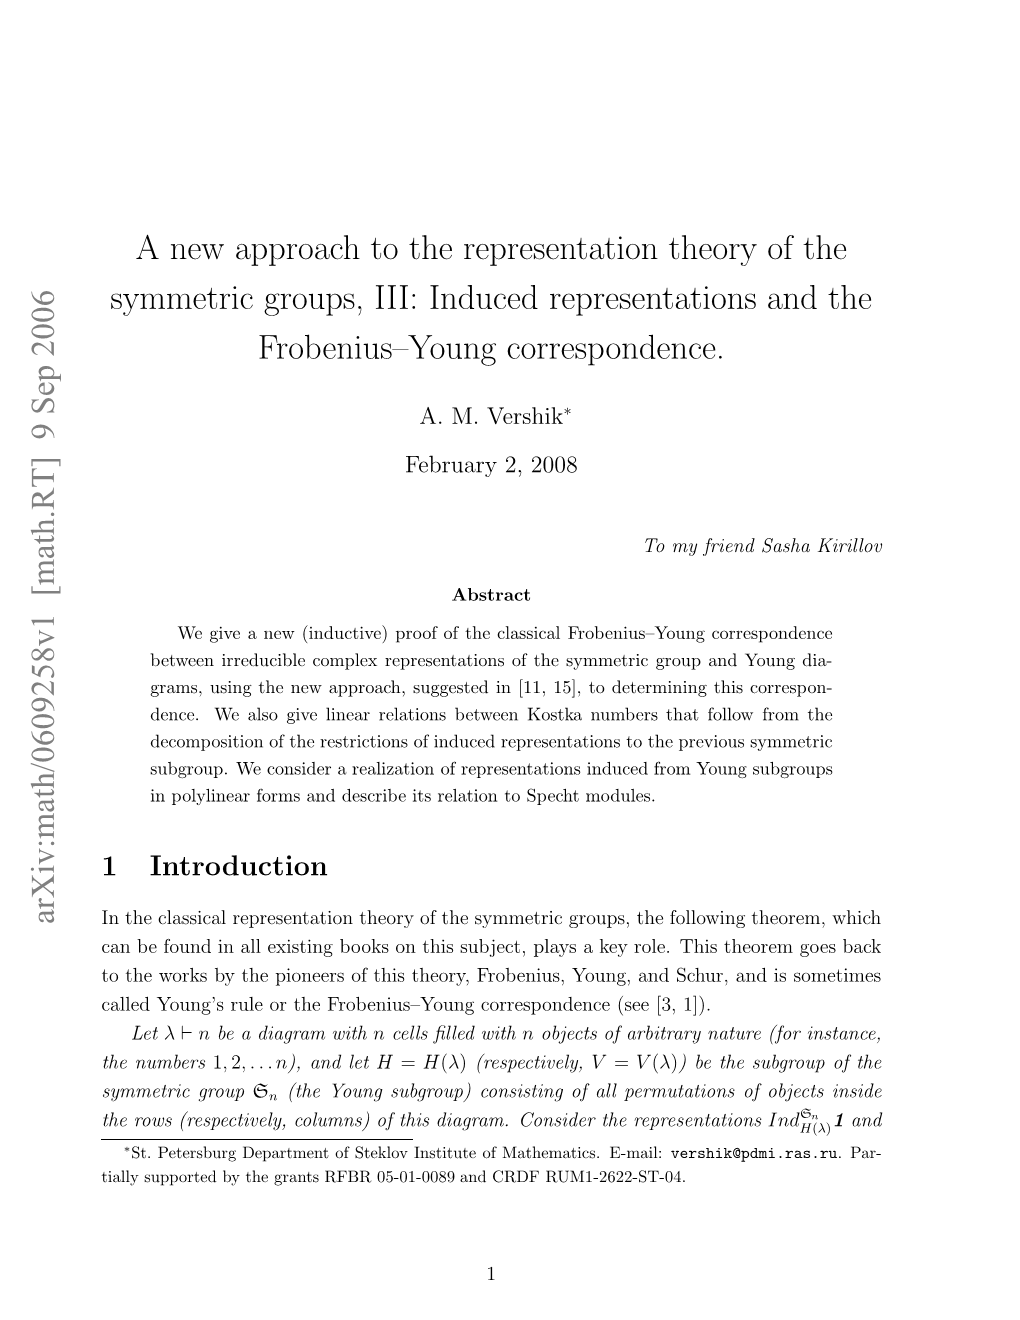 Induced Representations and the Frobenius–Young Correspondence